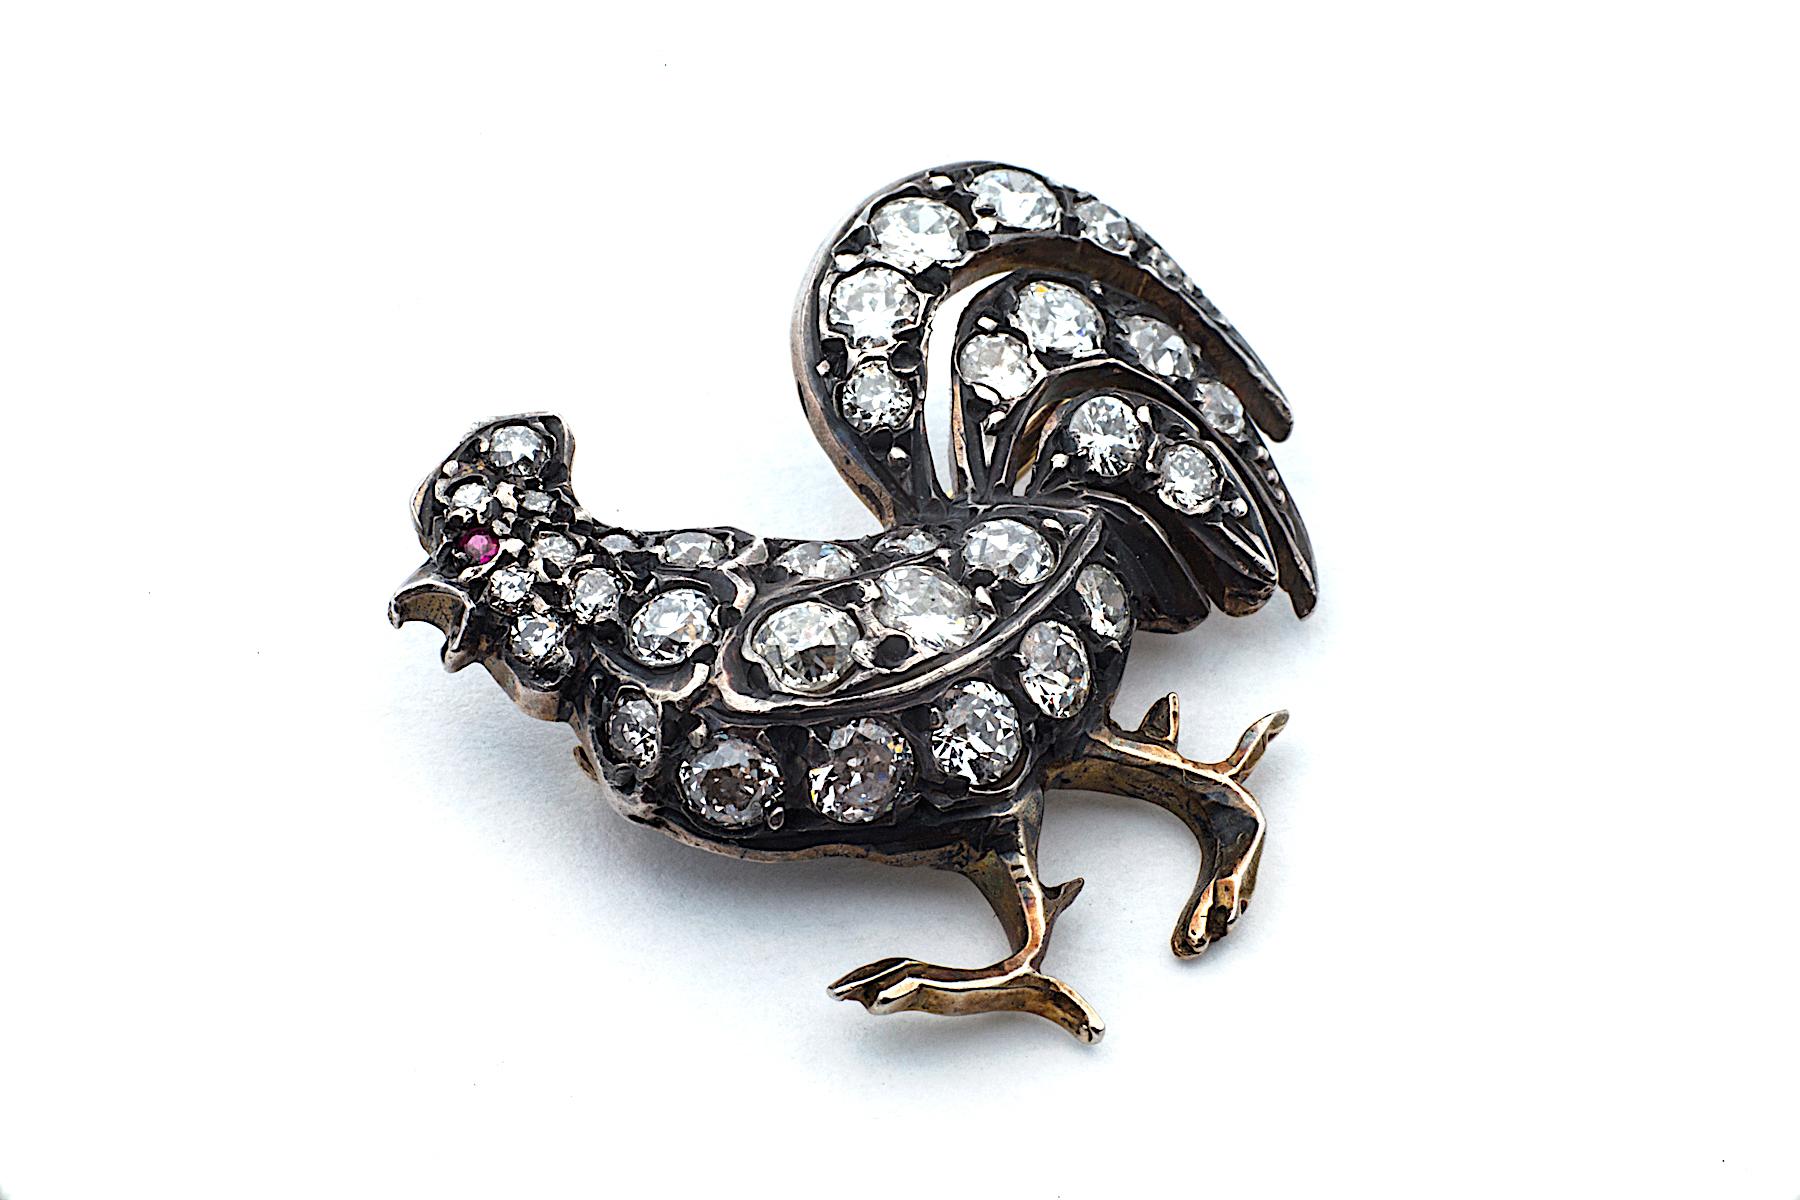 This beautifully designed and engineered French Victorian rooster brooch, with it's handsome plumage and confident stride, easily makes everyone smile!  With an embellished body of approximately one carat of single set round diamonds, this bird